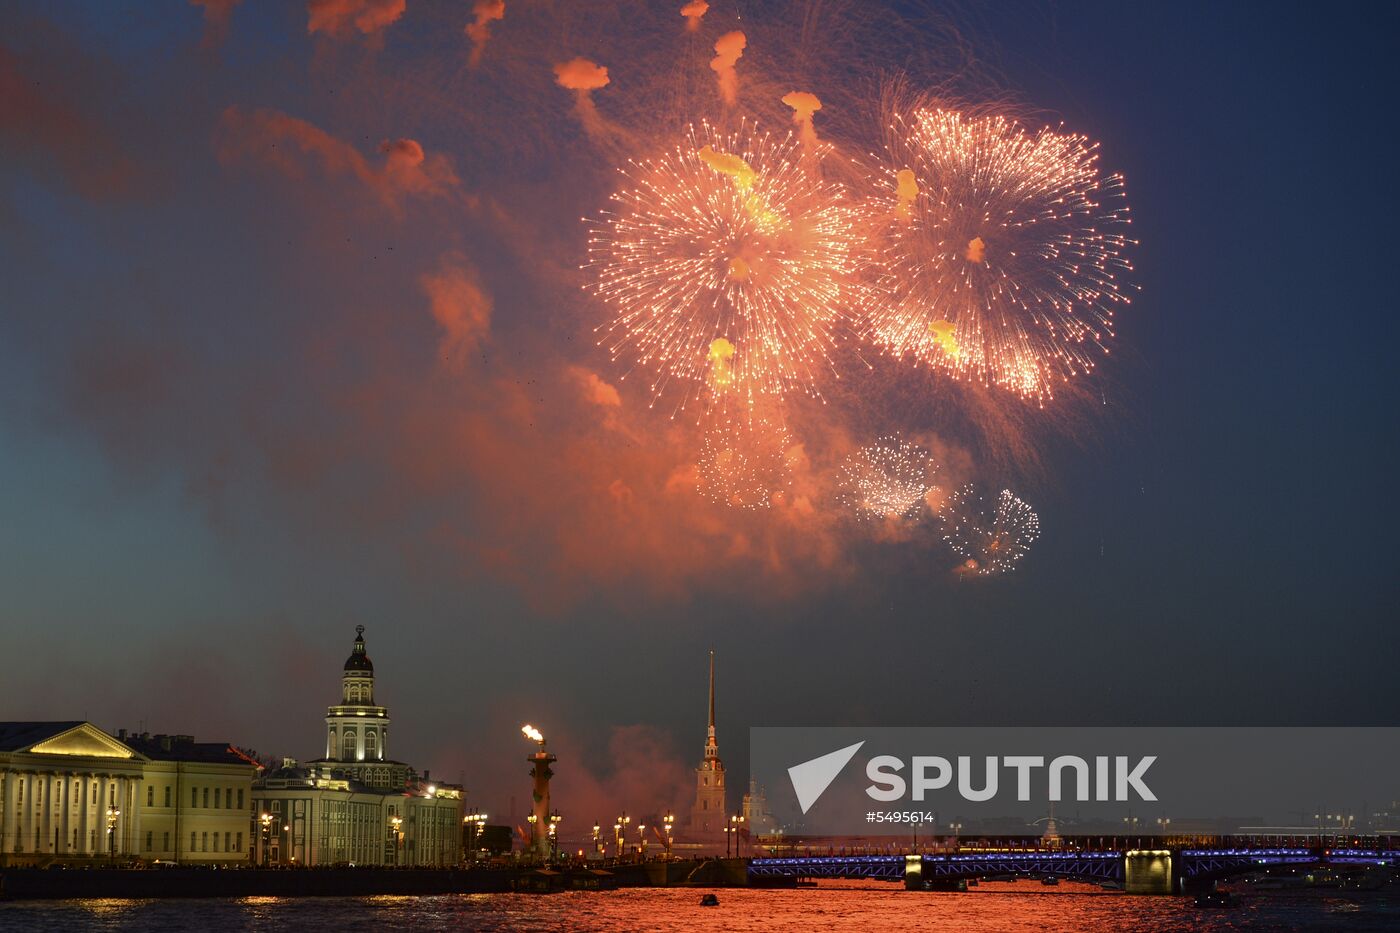 Fireworks display to mark Victory Day in Russian regions